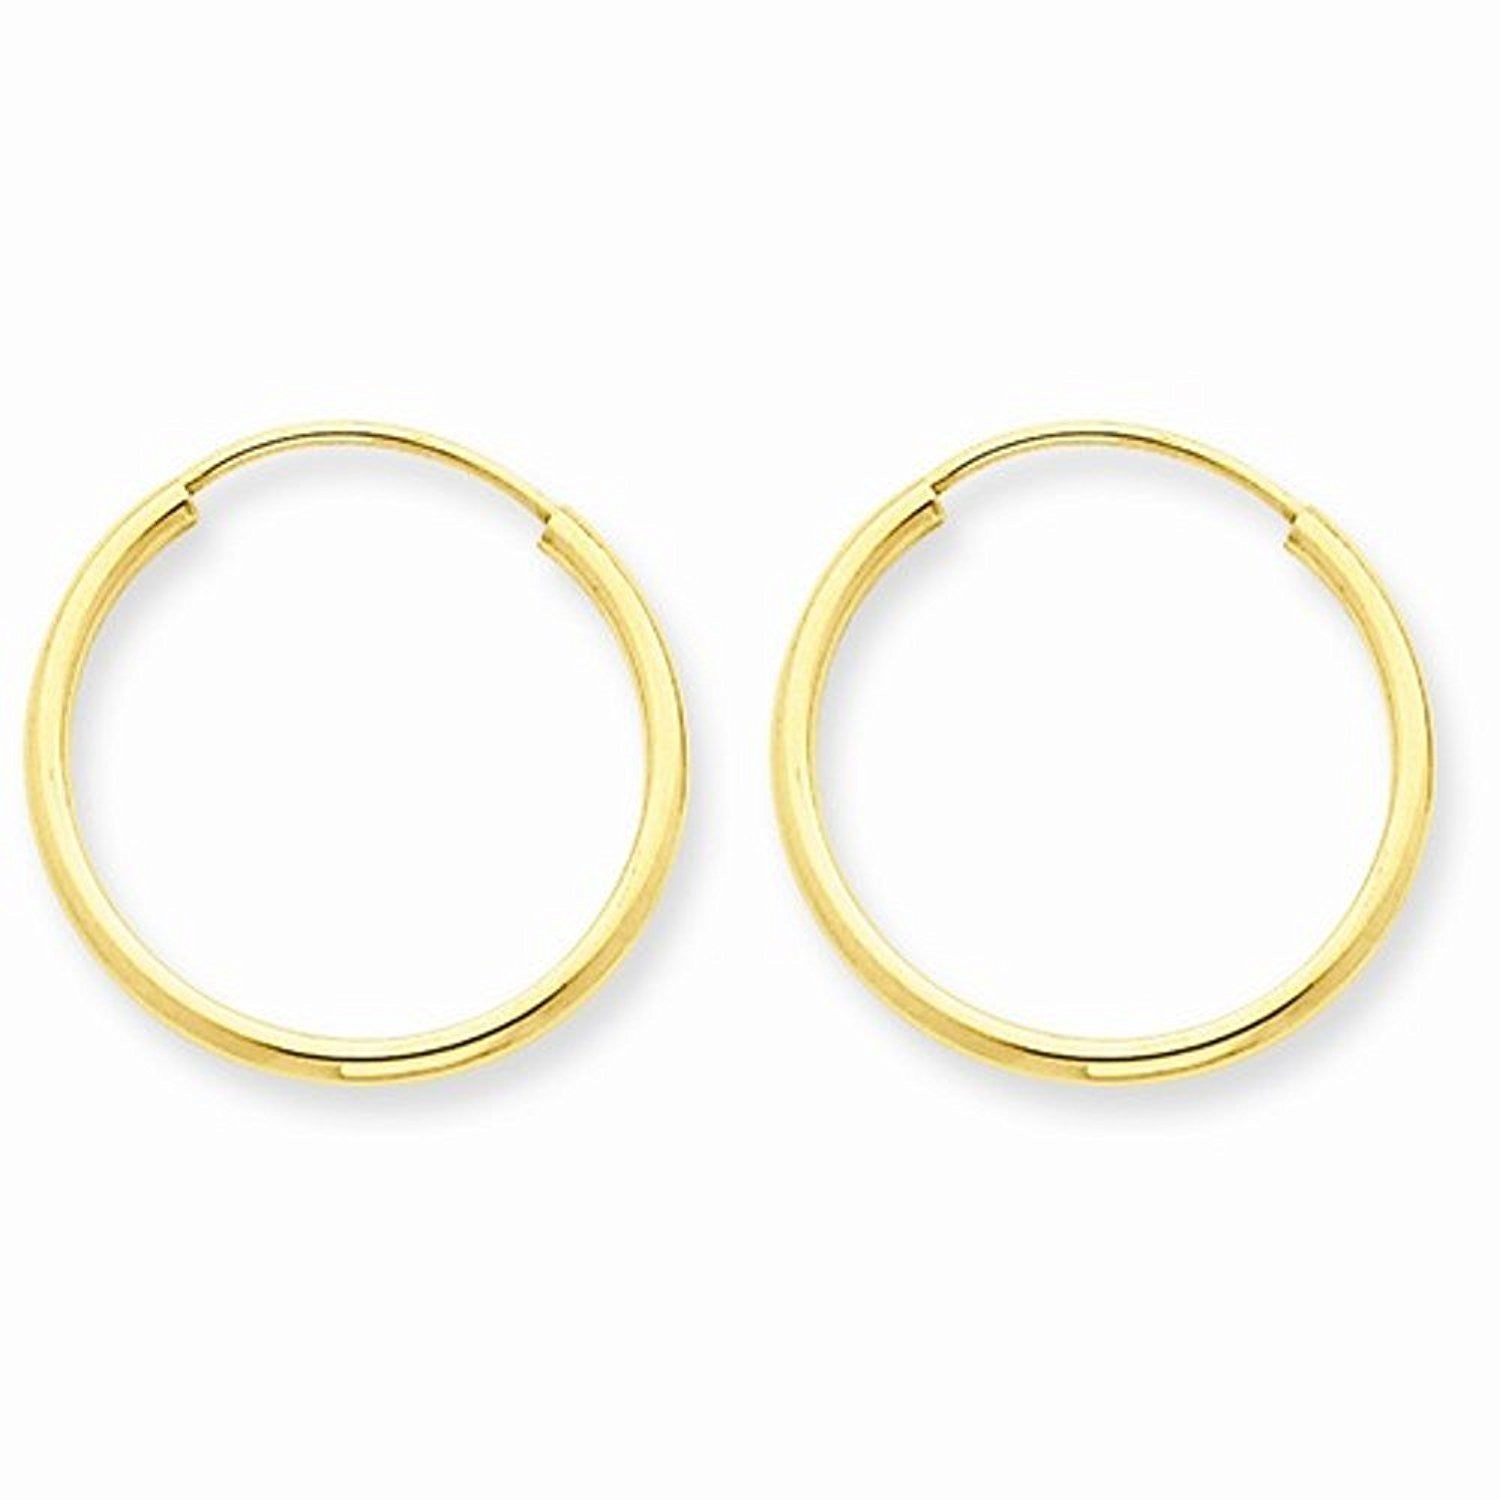 14K Yellow Gold 17mm x 1.5mm Endless Round Hoop Earrings